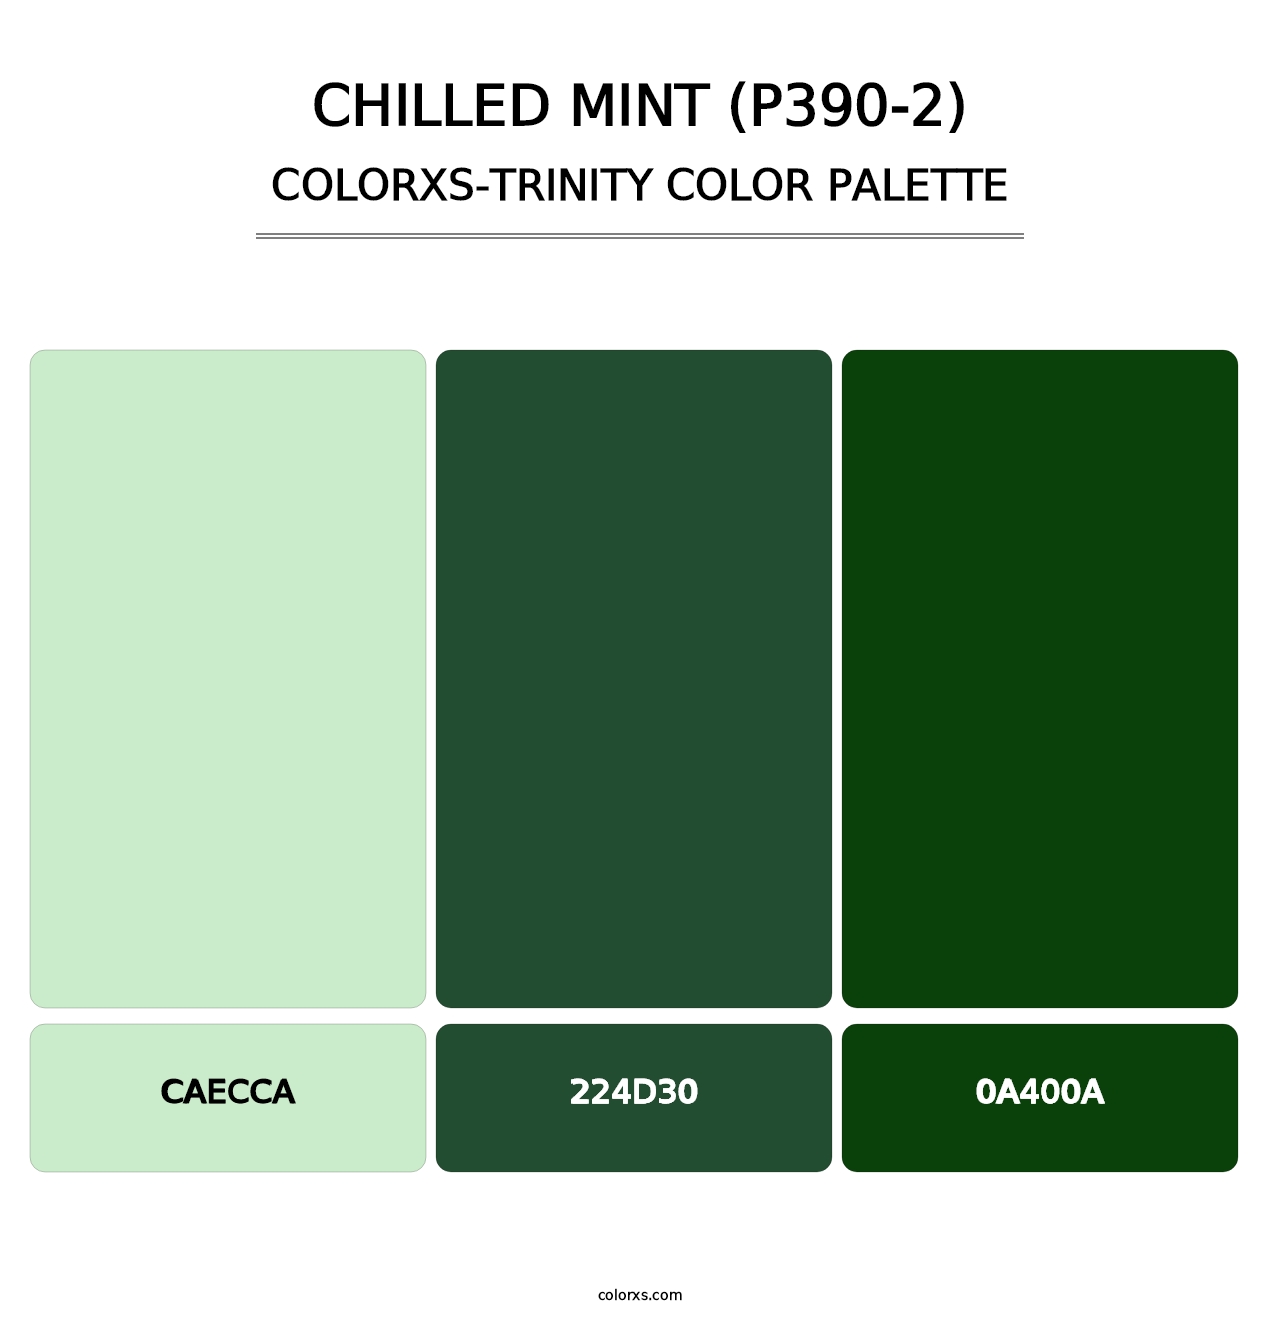 Chilled Mint (P390-2) - Colorxs Trinity Palette